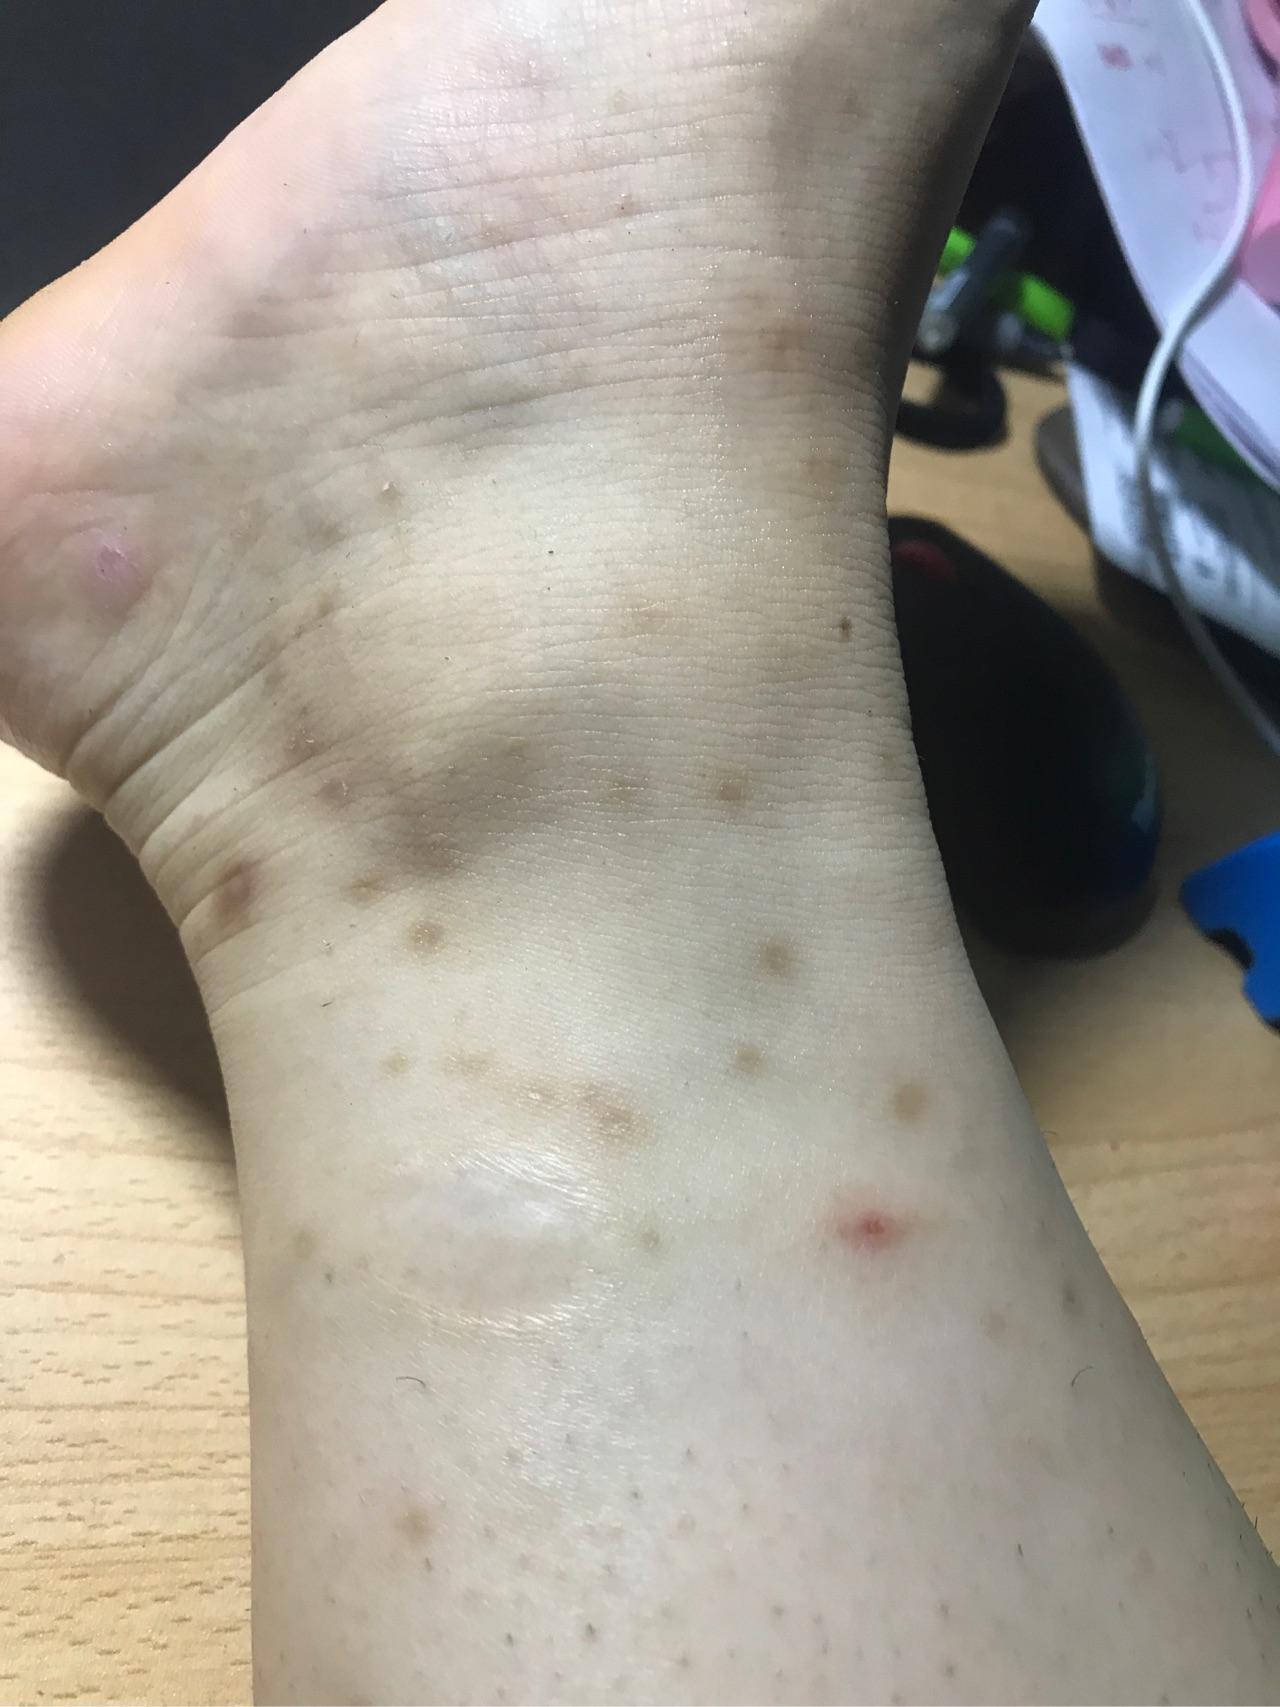 Bed Bug Bites Pictures, Symptoms: What Do Bed Bug Bites Look Like ...